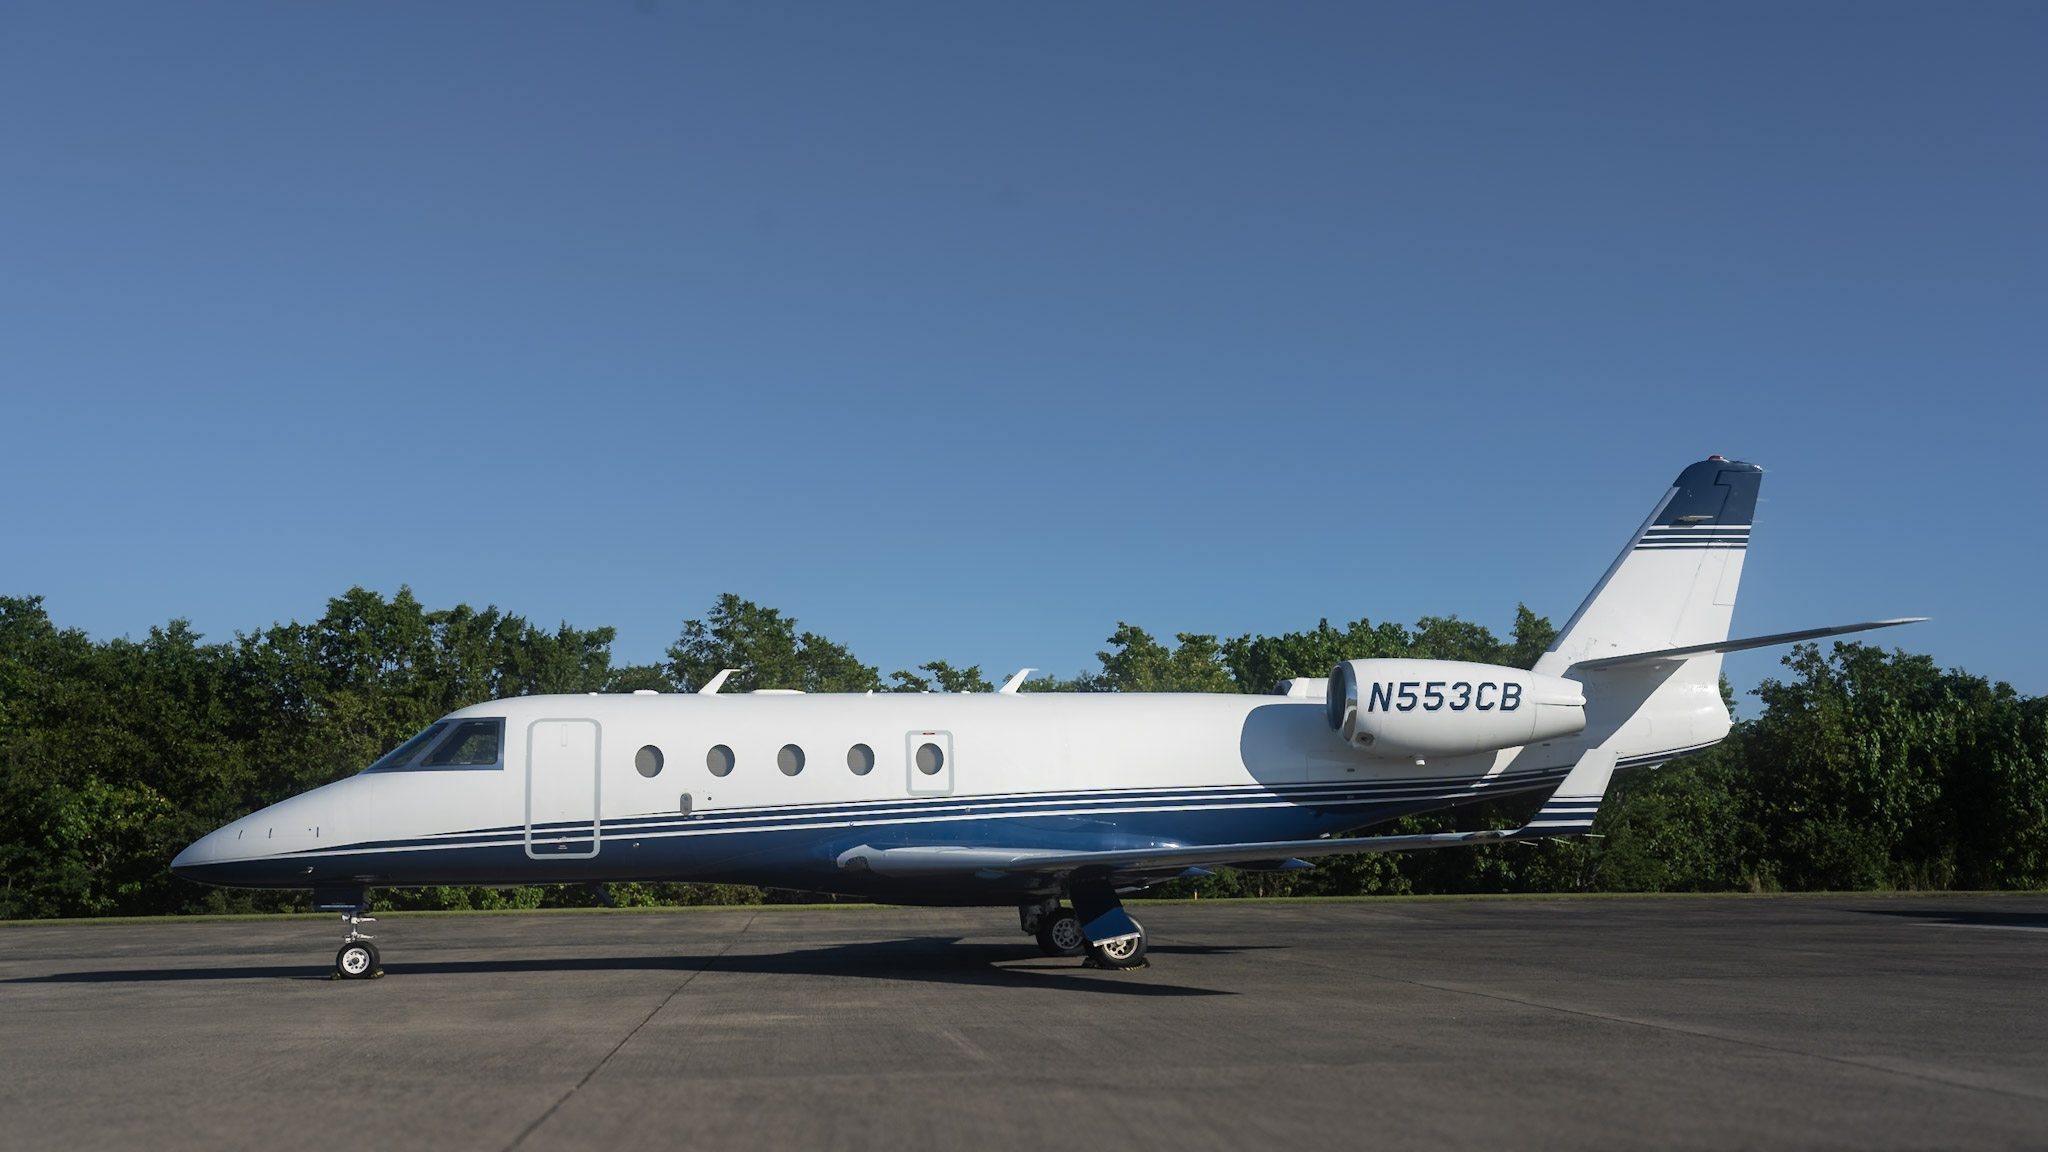 2008 Gulfstream G150 Private Jet For Sale (N553CB) From JPN Aviation On AvPay aircraft exterior